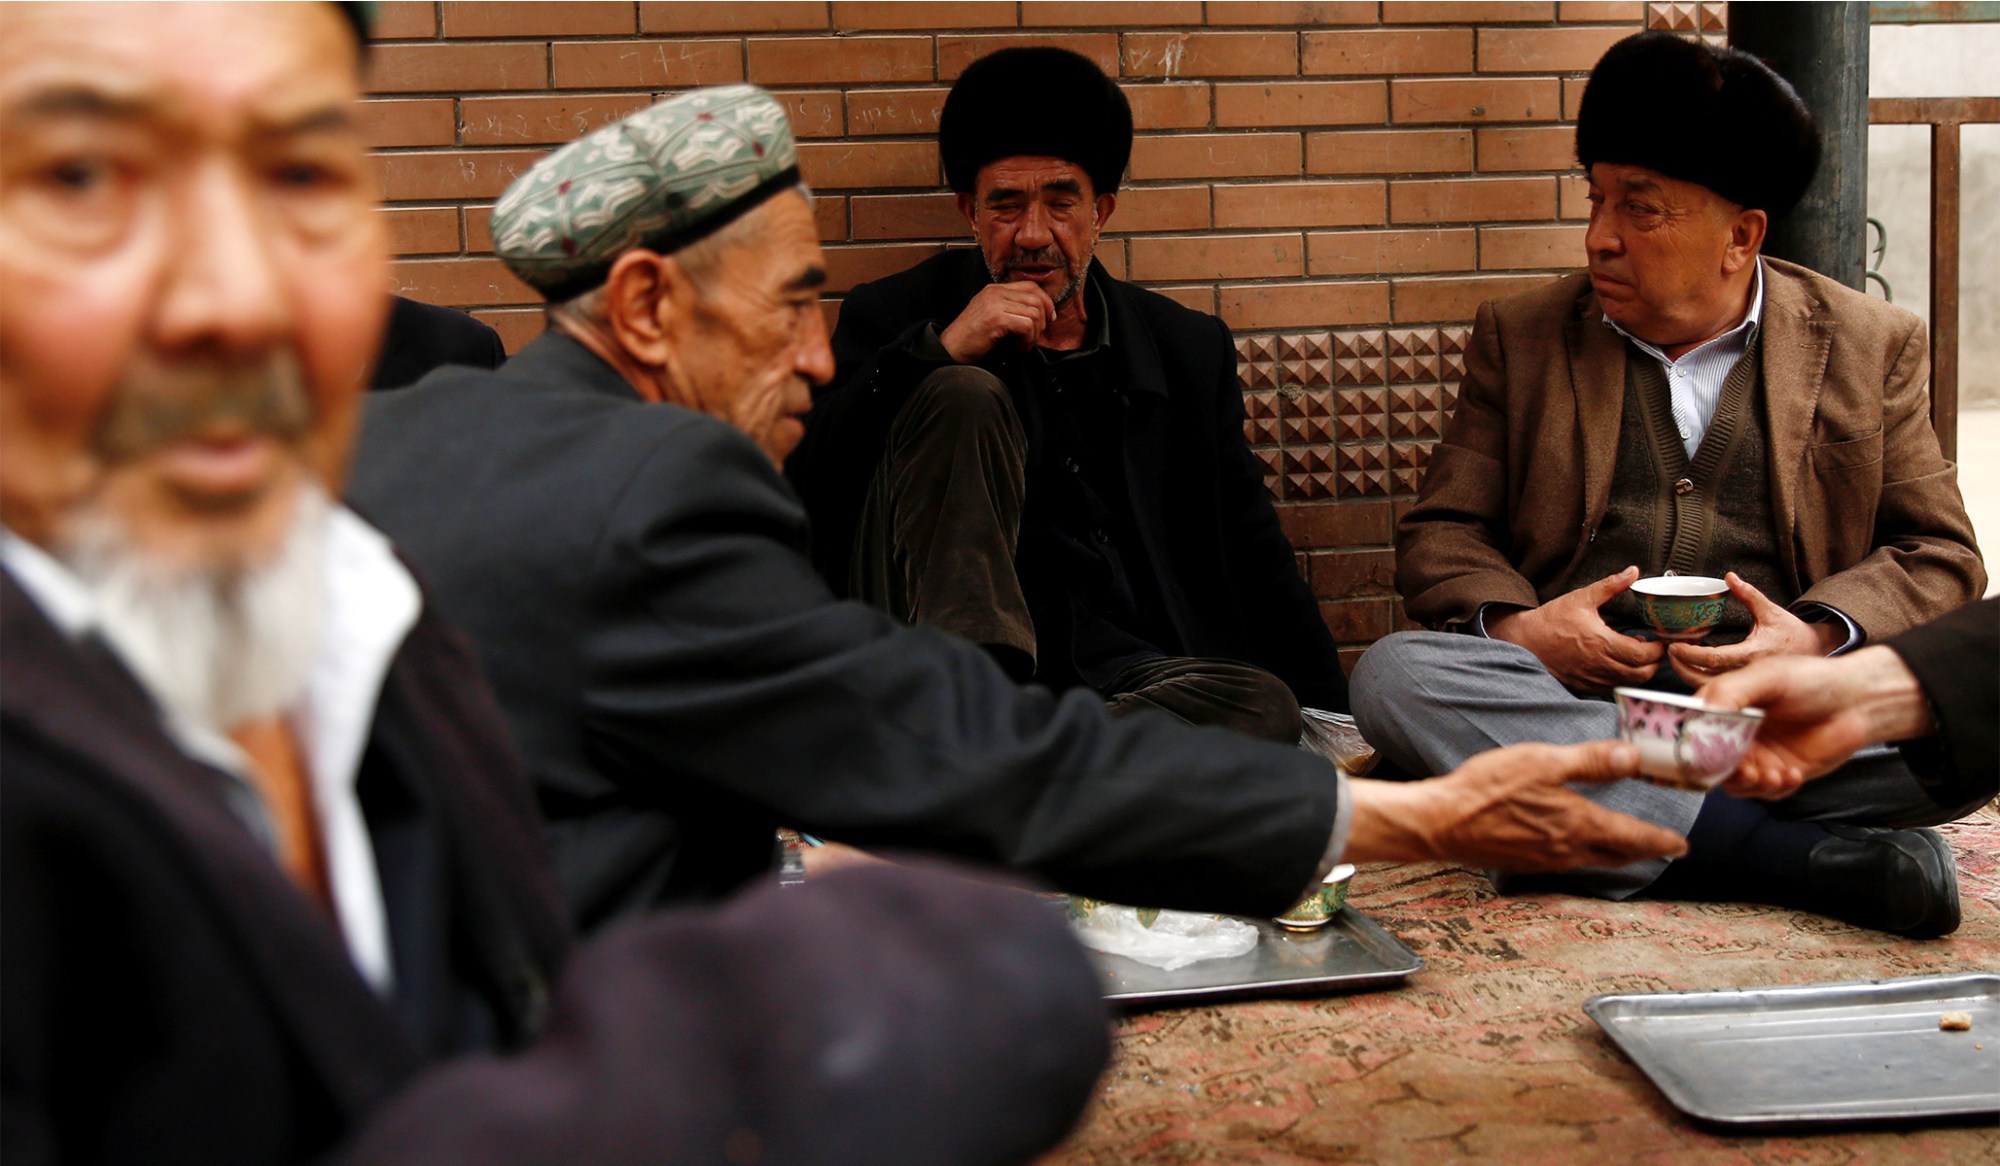 The Persecution of the Uyghurs